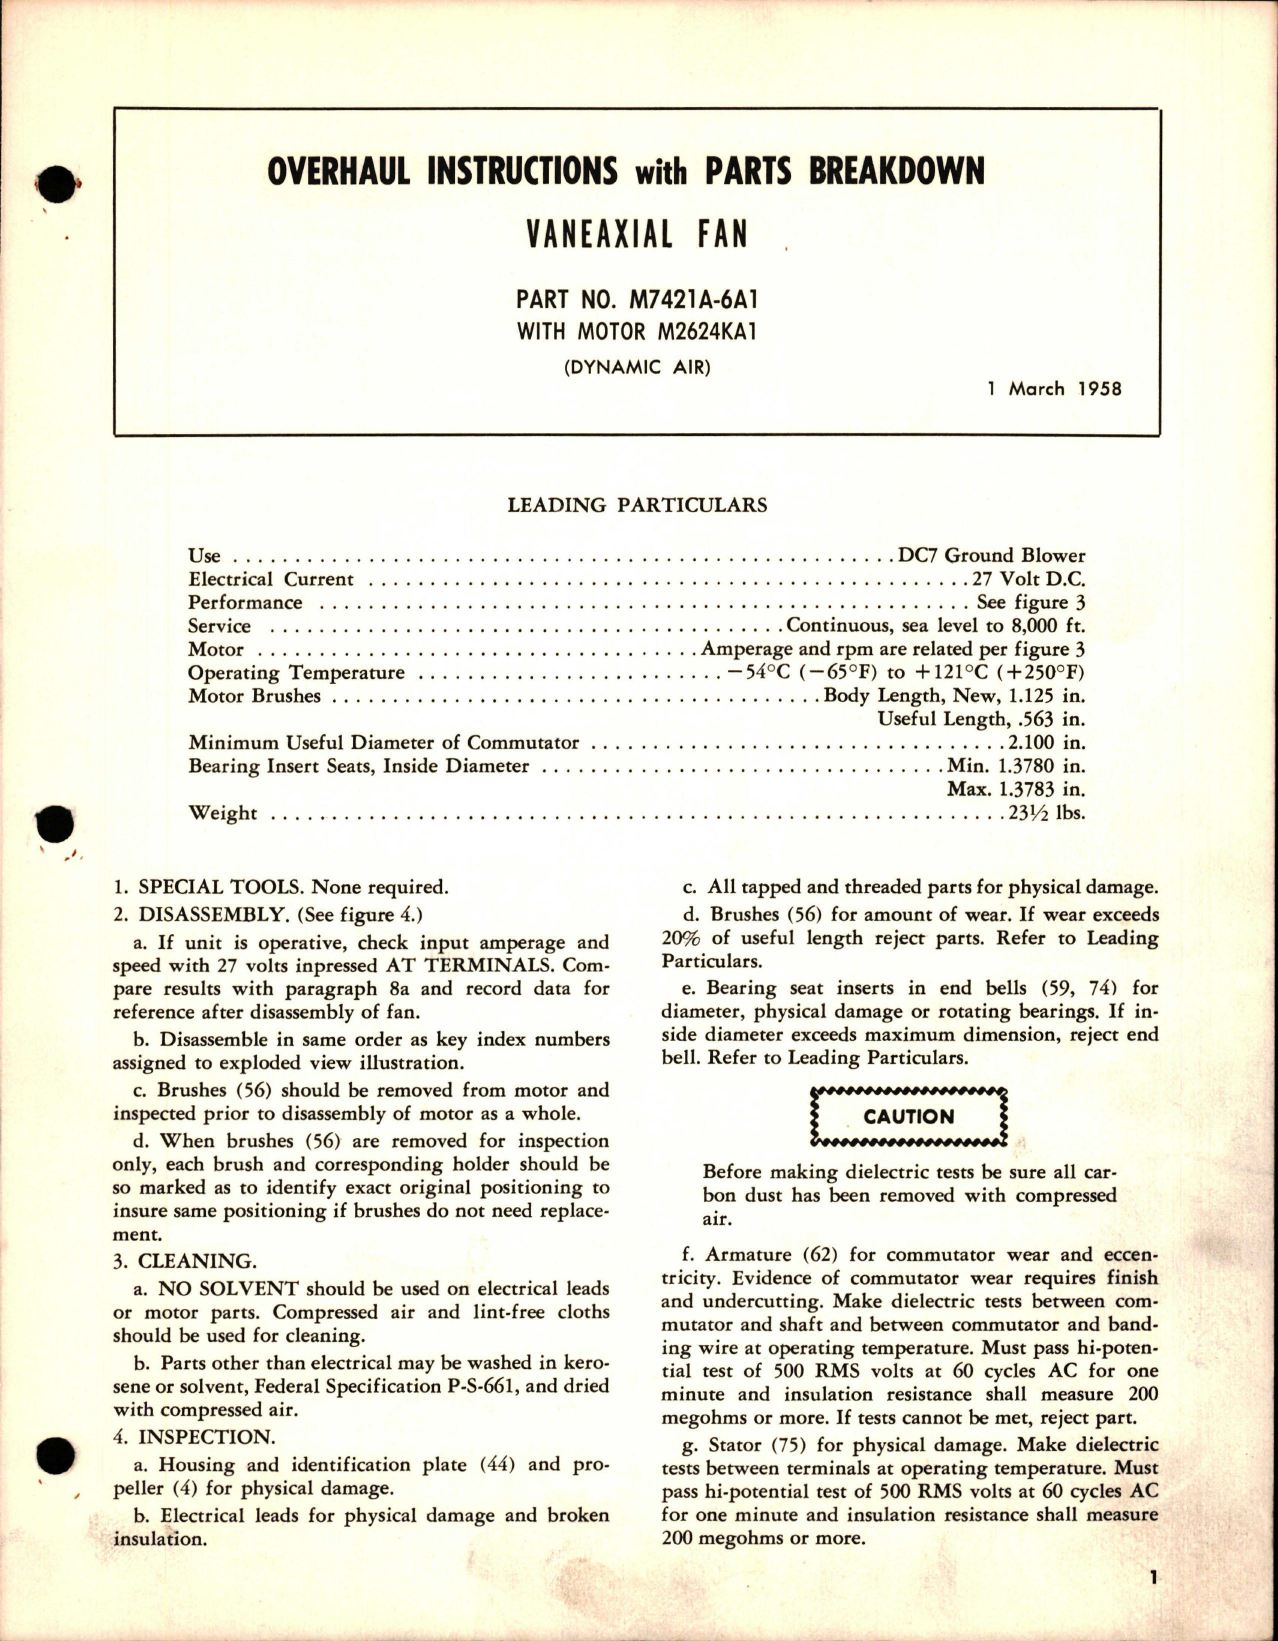 Sample page 1 from AirCorps Library document: Overhaul Instructions for Vaneaxial Fan - Part M7421A-6A1 - with Motor M2624KA1